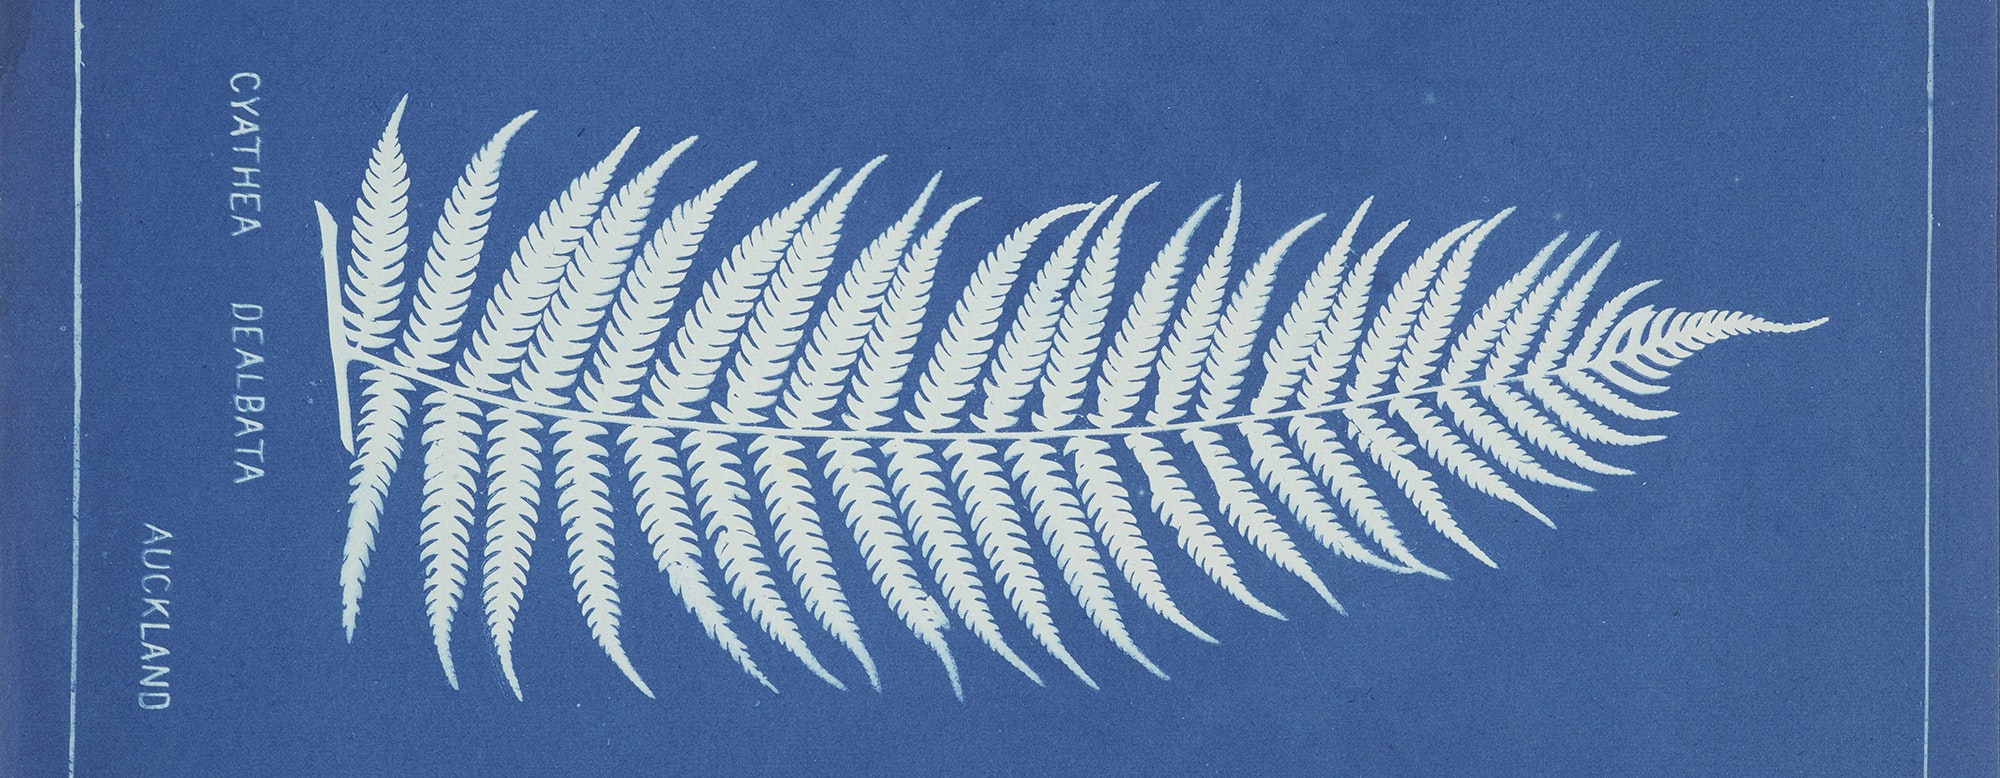 A white silhouette of a fern on blue background with the words Cyathea Dealbata and Auckland written on it